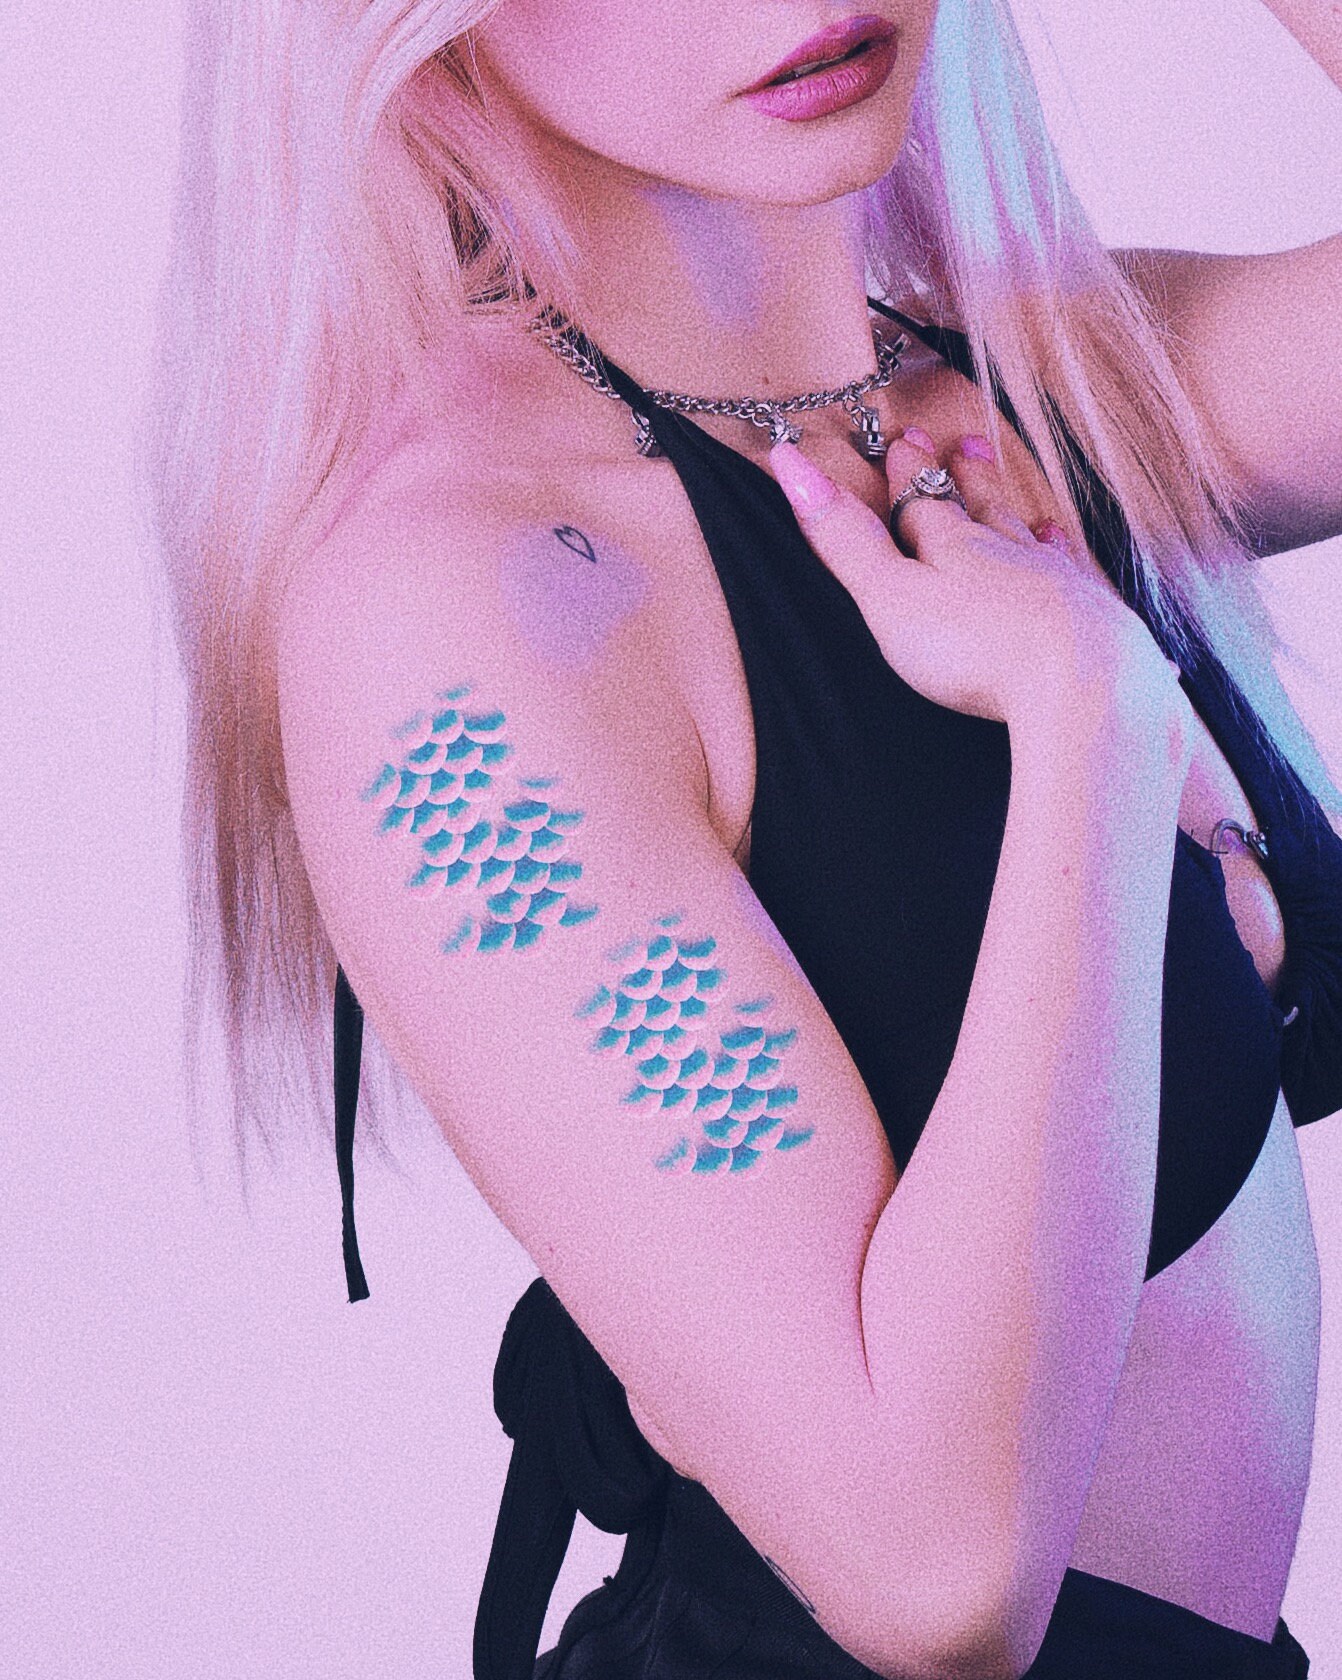 Mermaid Scales Temporary Tattoos / Realistic Mermaid Scales / BIG and  Detailed / Fun Party Favors / Mermaid Festival Accessory 